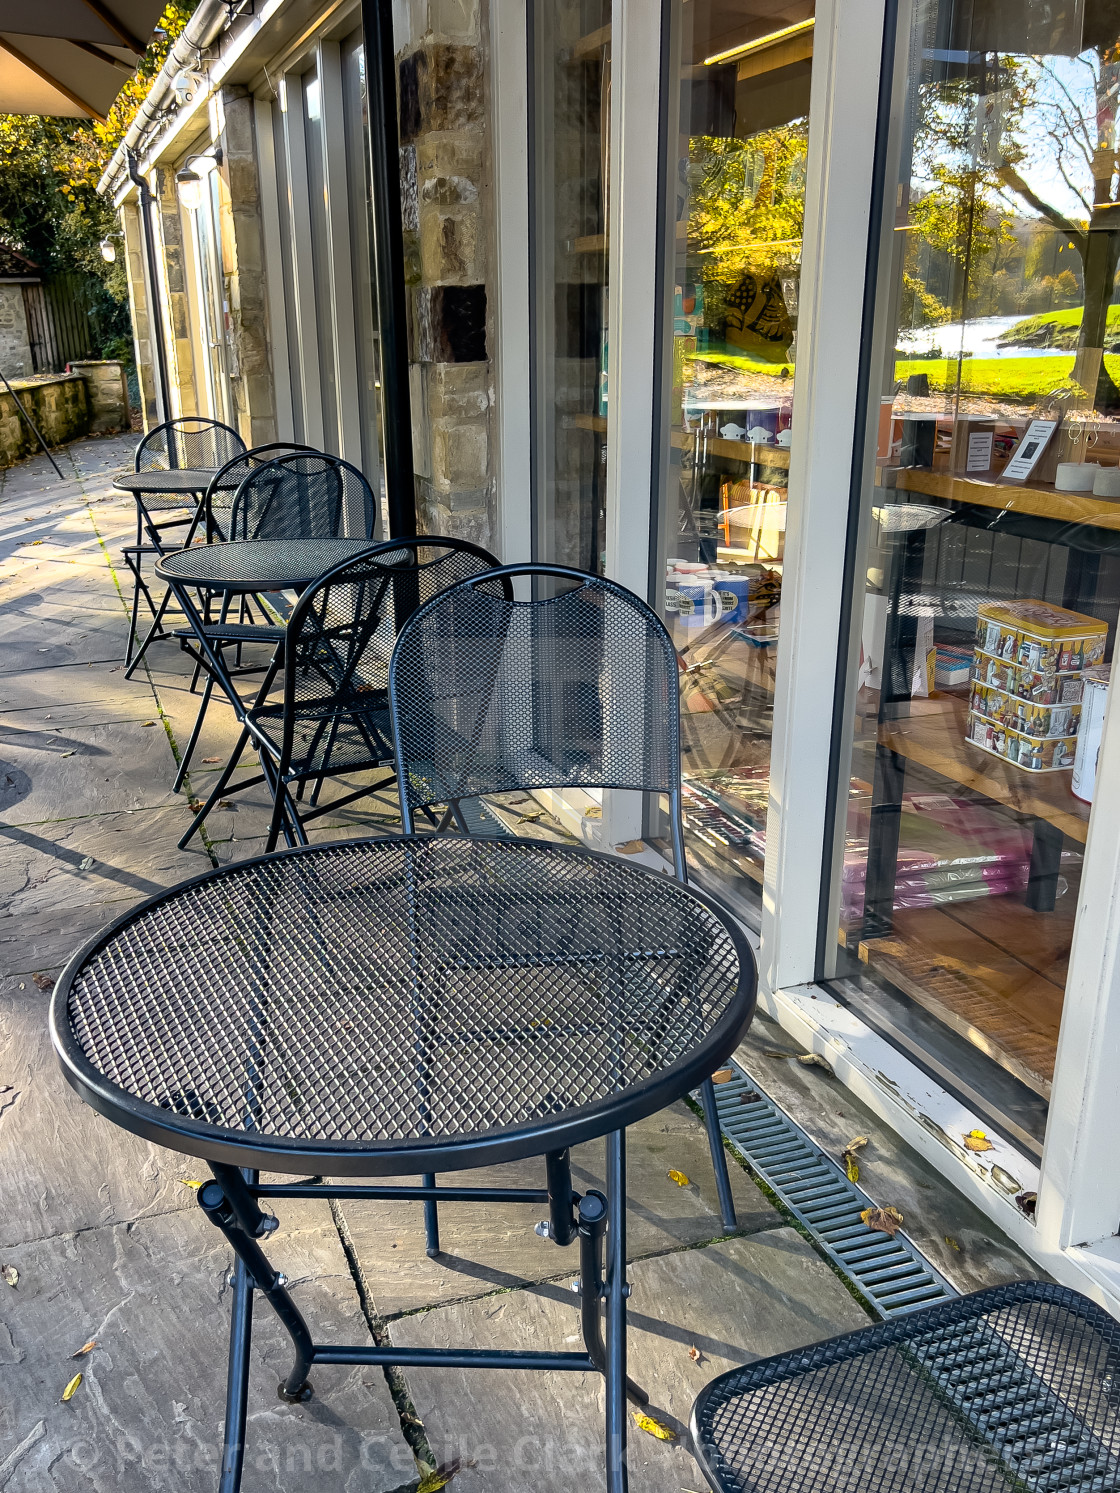 "Bistro table and chairs at Riverbank, Coffee shop, Burnsall, Yorkshire Dales." stock image